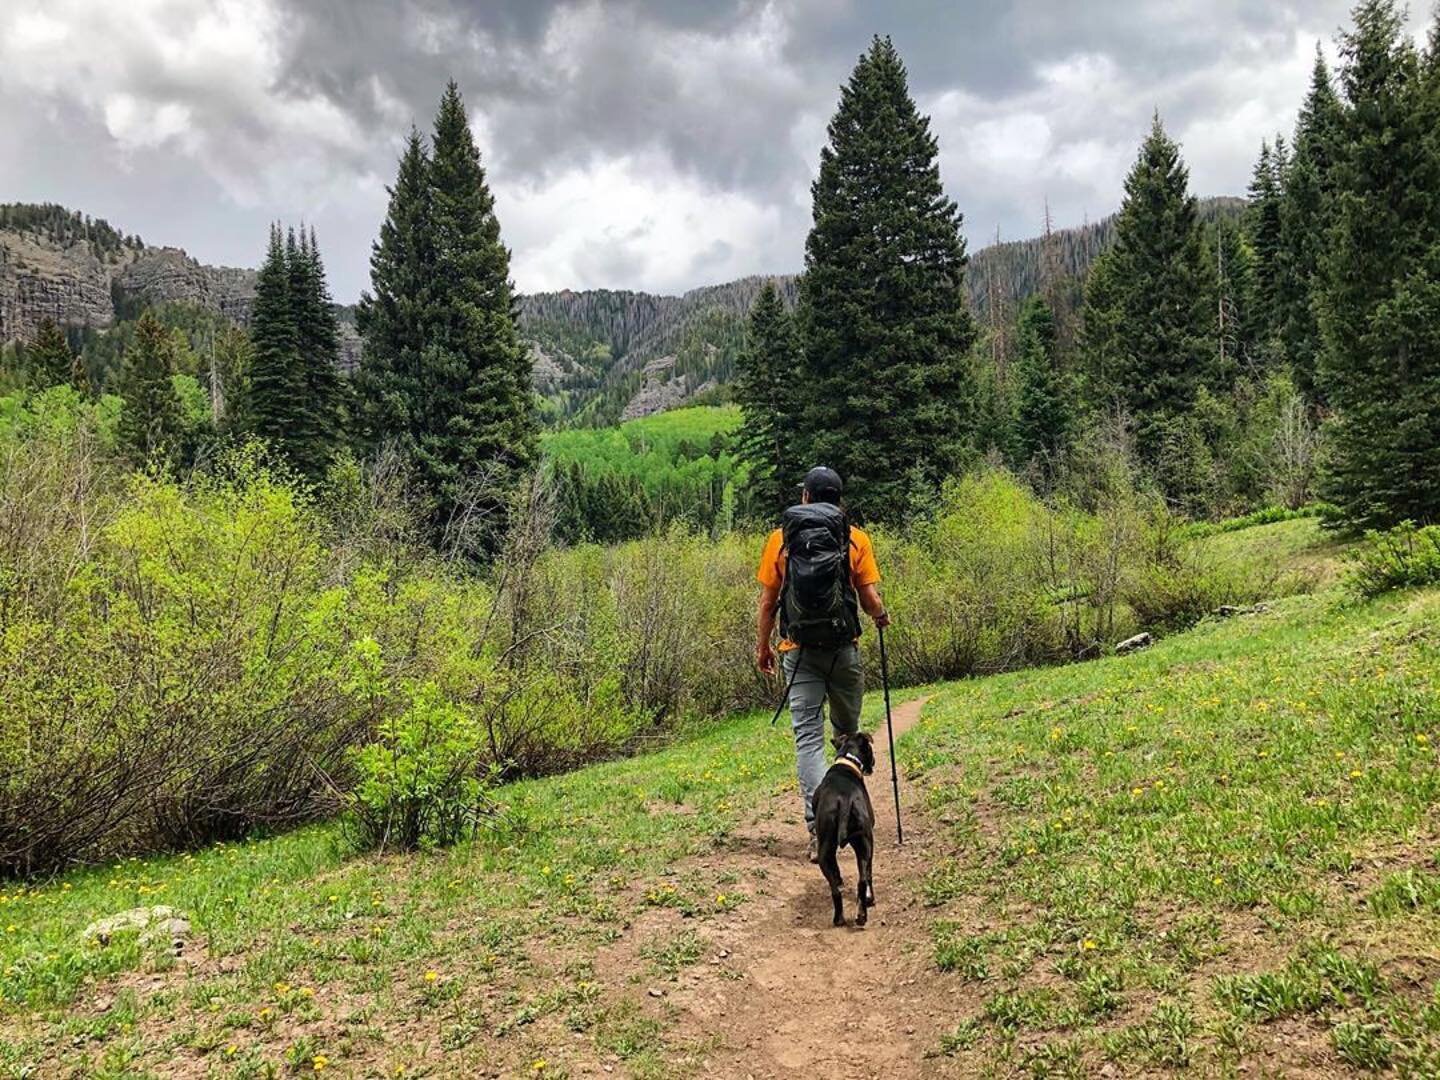 “Sometimes life’s just a walk in the park.” When your park is this beautiful...you gotta walk it. We Lvod the inspiration from our ambassador @mcmahonwich who take the time to do what they love.
.
.
.
.
.

#optoutside #alltrails #gohike #ItsInMyNature #teamoutdoors #WeAreConservation #rei1440project #outdoors #nicehike #adventure #getoutside #fitness #outdoortones #travel #liveadventurously #liveoutsidethebox #colorado #adventuretime #hiking #health #takemoreadventures #peoplewhoadventure #wildandco #liveoutside #mypubliclands #livenobox #modernoutdoors #modernoutdoorsman #weekendworkout #hikingwithdogs